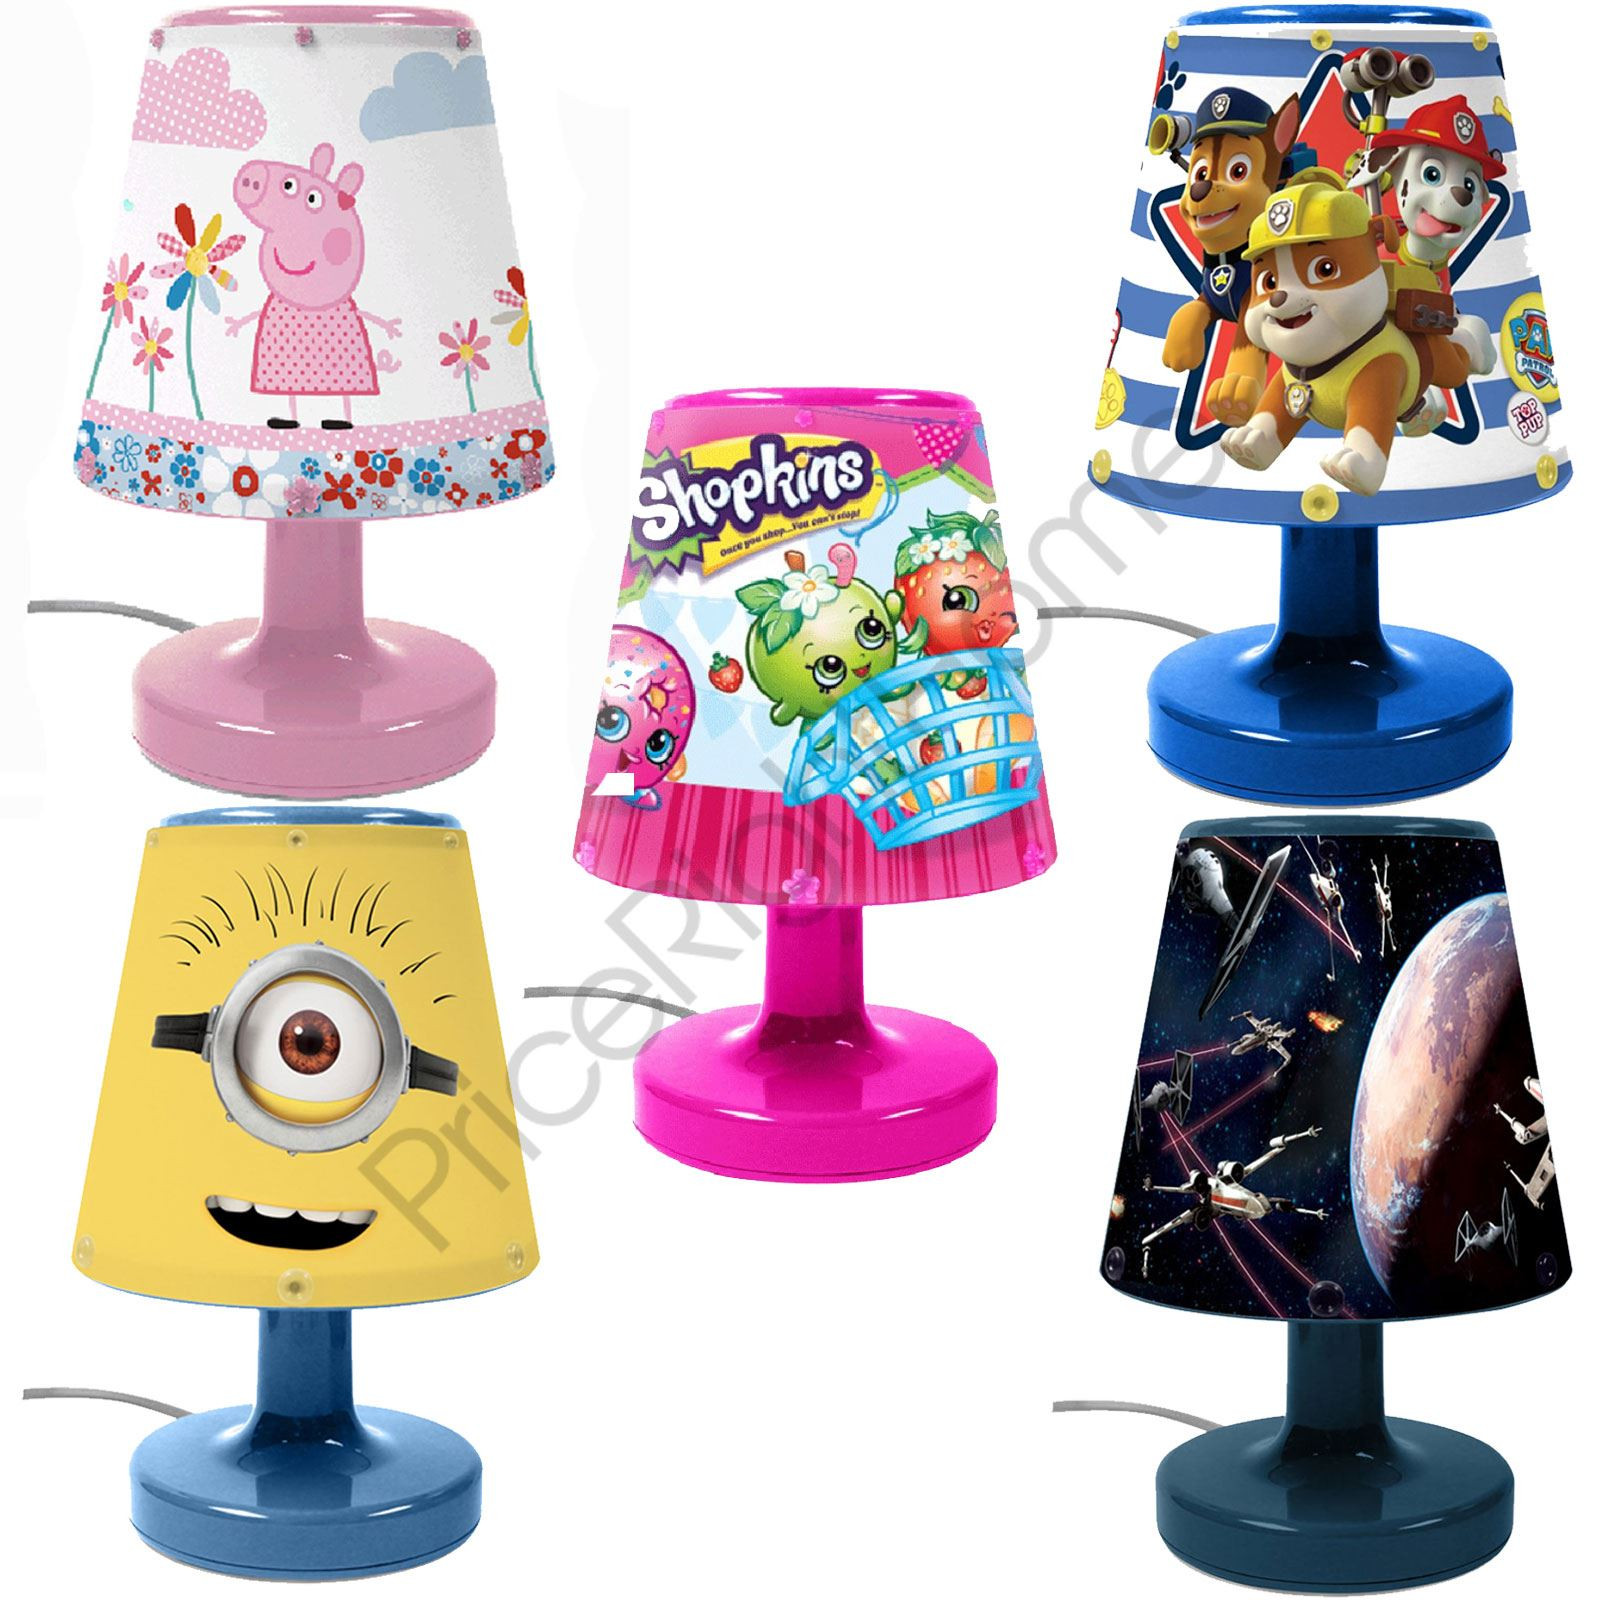 Boys Bedroom Lamp
 DISNEY & CHARACTER KIDS BEDROOM BEDSIDE LAMPS FOR BOYS AND